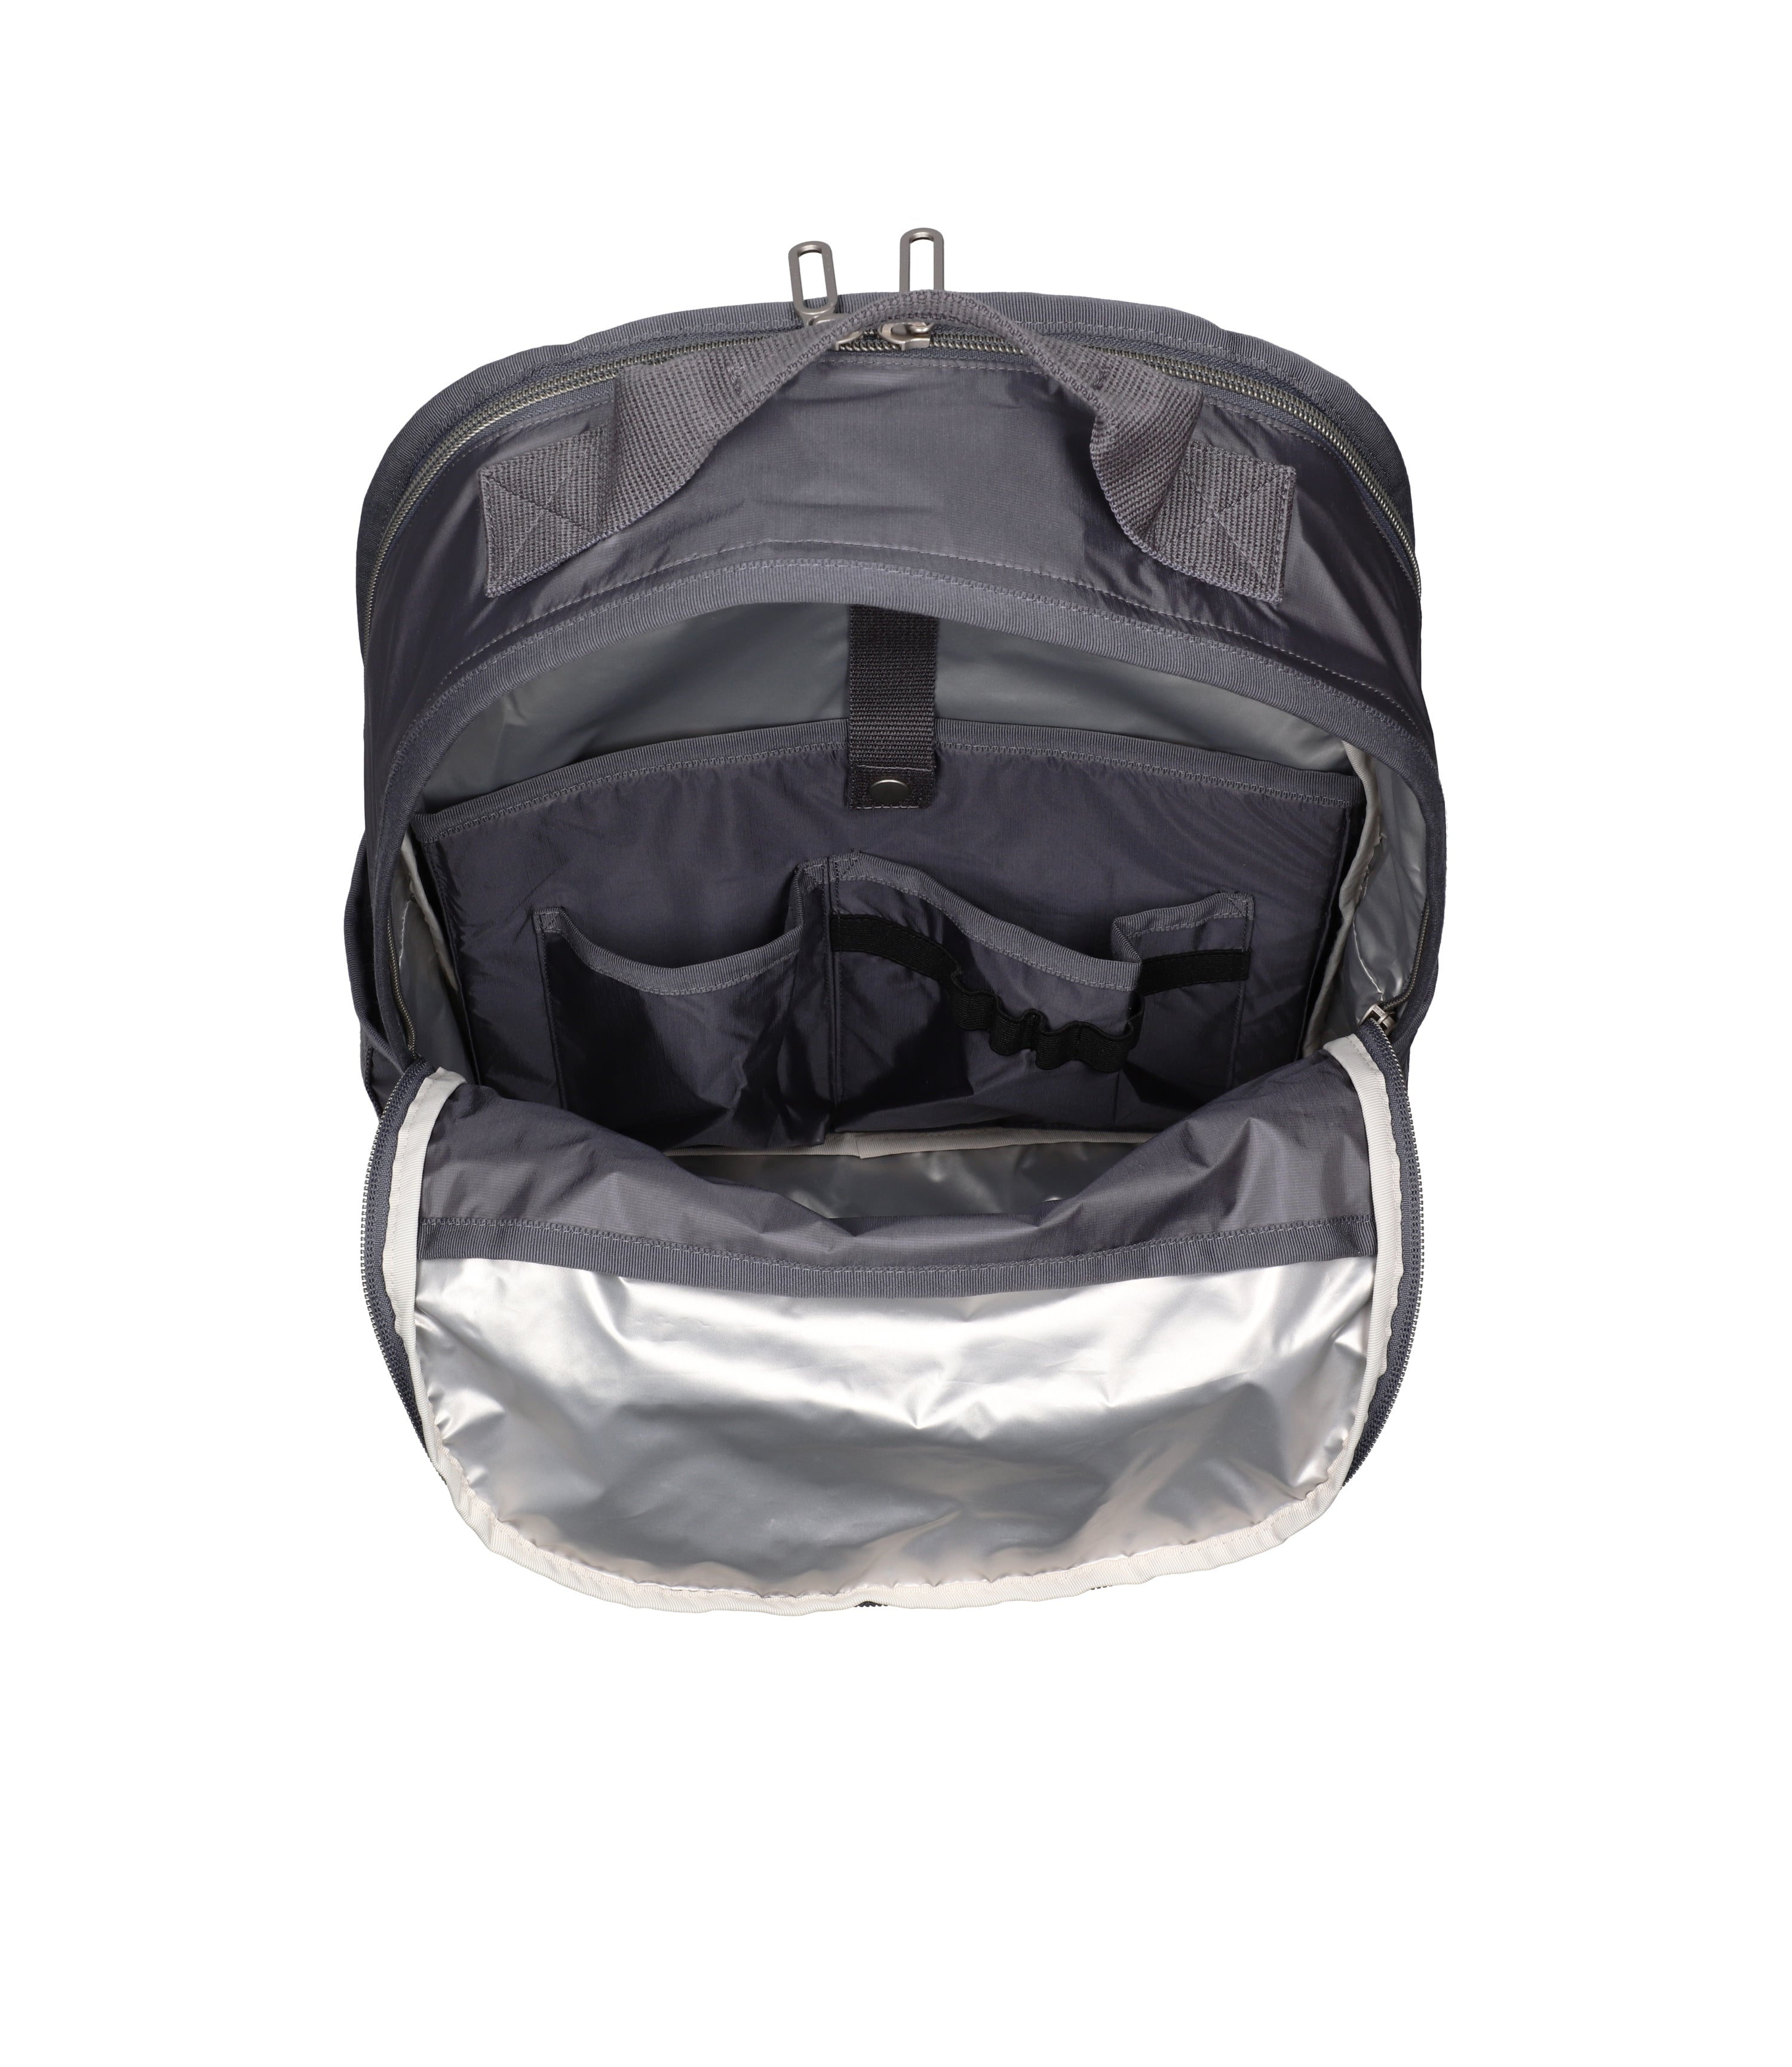 Essential Carryall Backpack